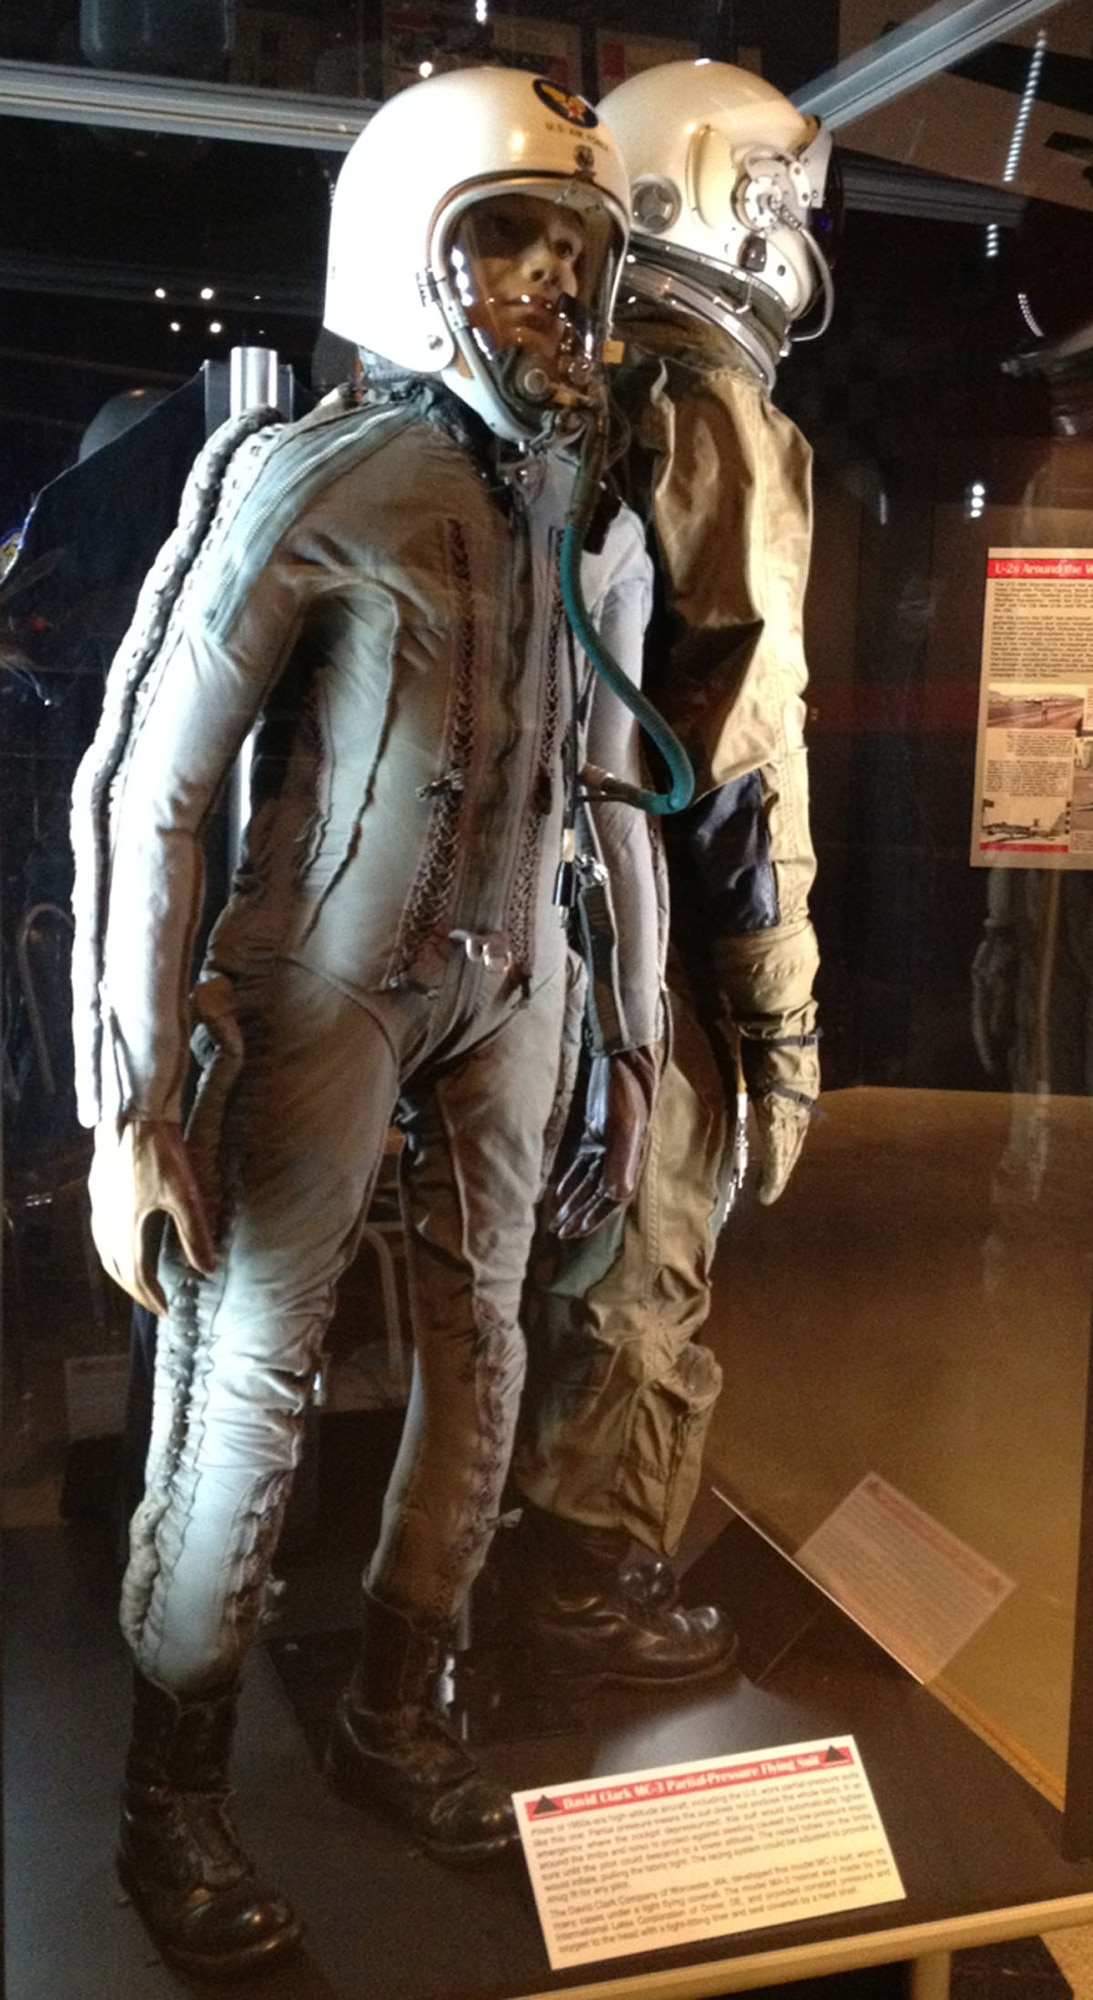 DAYTON, Ohio - David Clark MC-3 Partial Pressure Flying Suit on display in the Cold War Gallery at the National Museum of the U.S. Air Force. (U.S. Air Force photo)